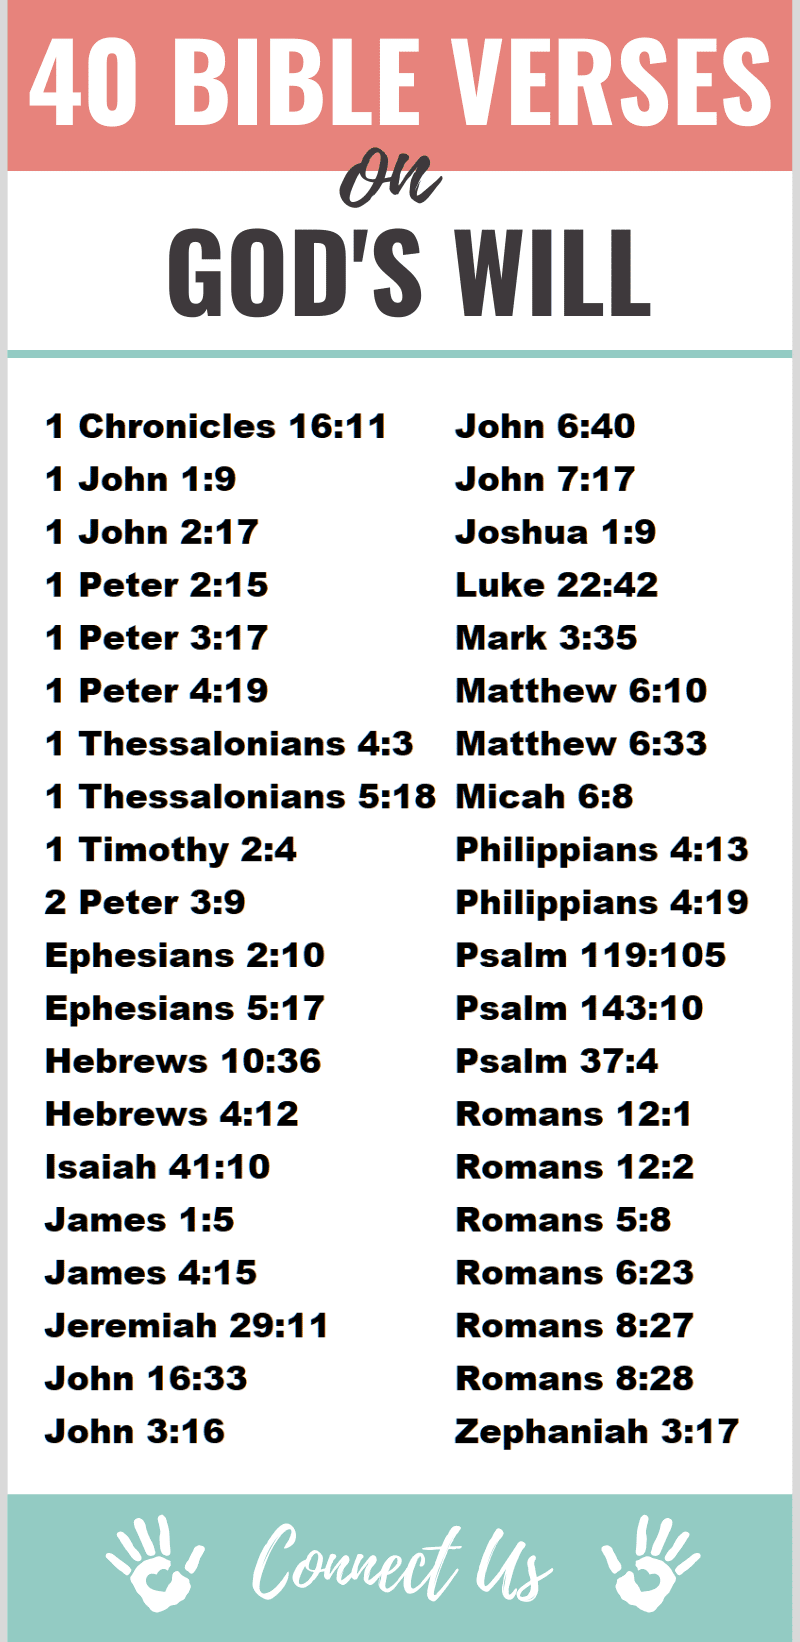 Bible Verses on God's Will